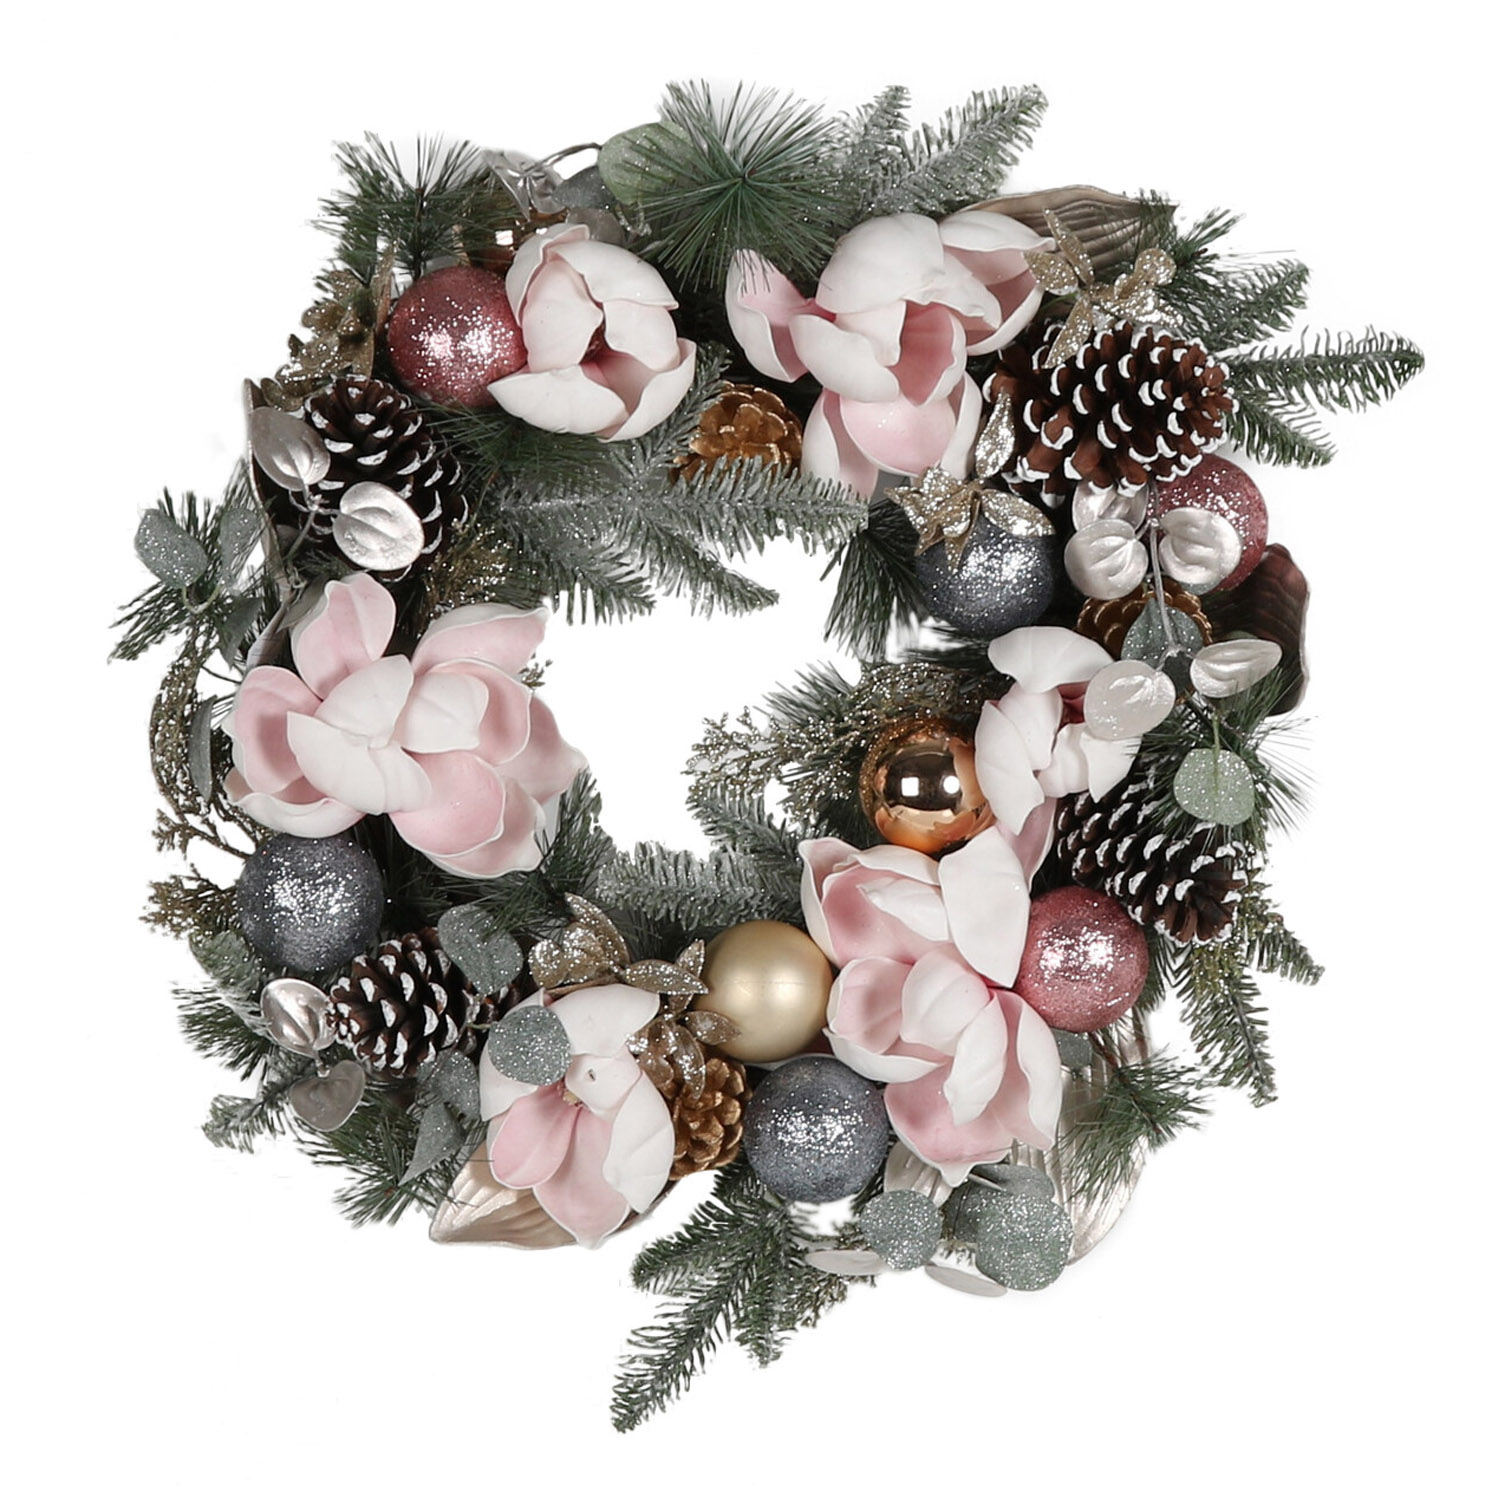 Christmas Wintery Foliage Blush Flower and Bauble Wreath Image